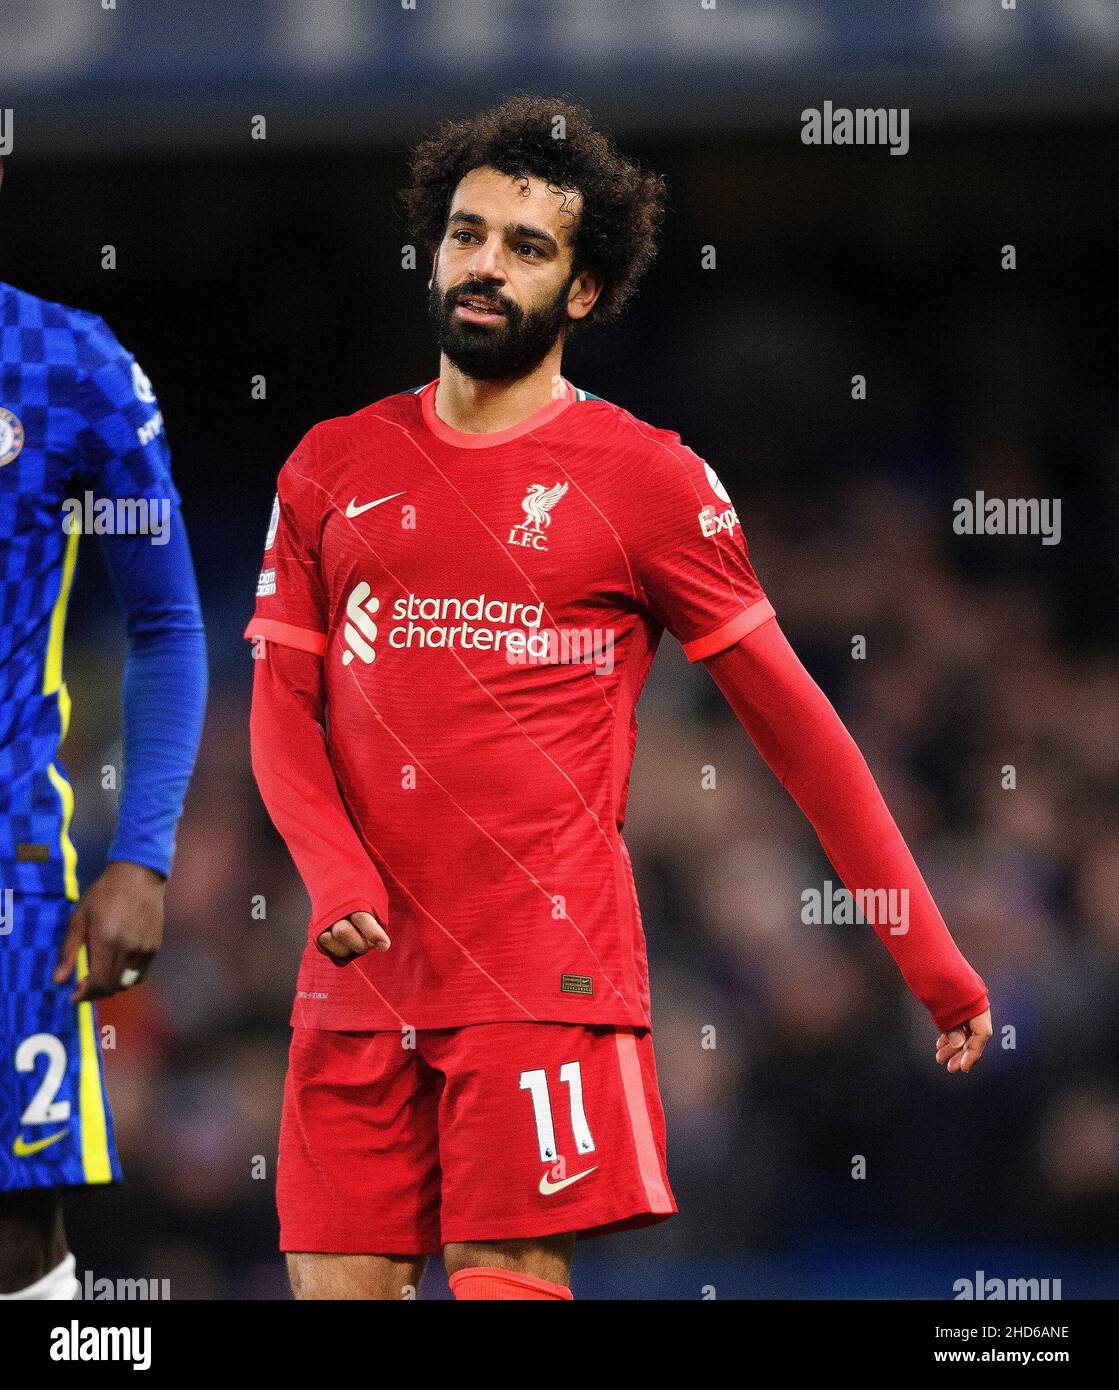 02 January - Chelsea v Liverpool - Premier League - Stamford Bridge  Mohamed Salah during the Premier League match at Stamford Bridge Picture Credit : © Mark Pain / Alamy Live News Stock Photo